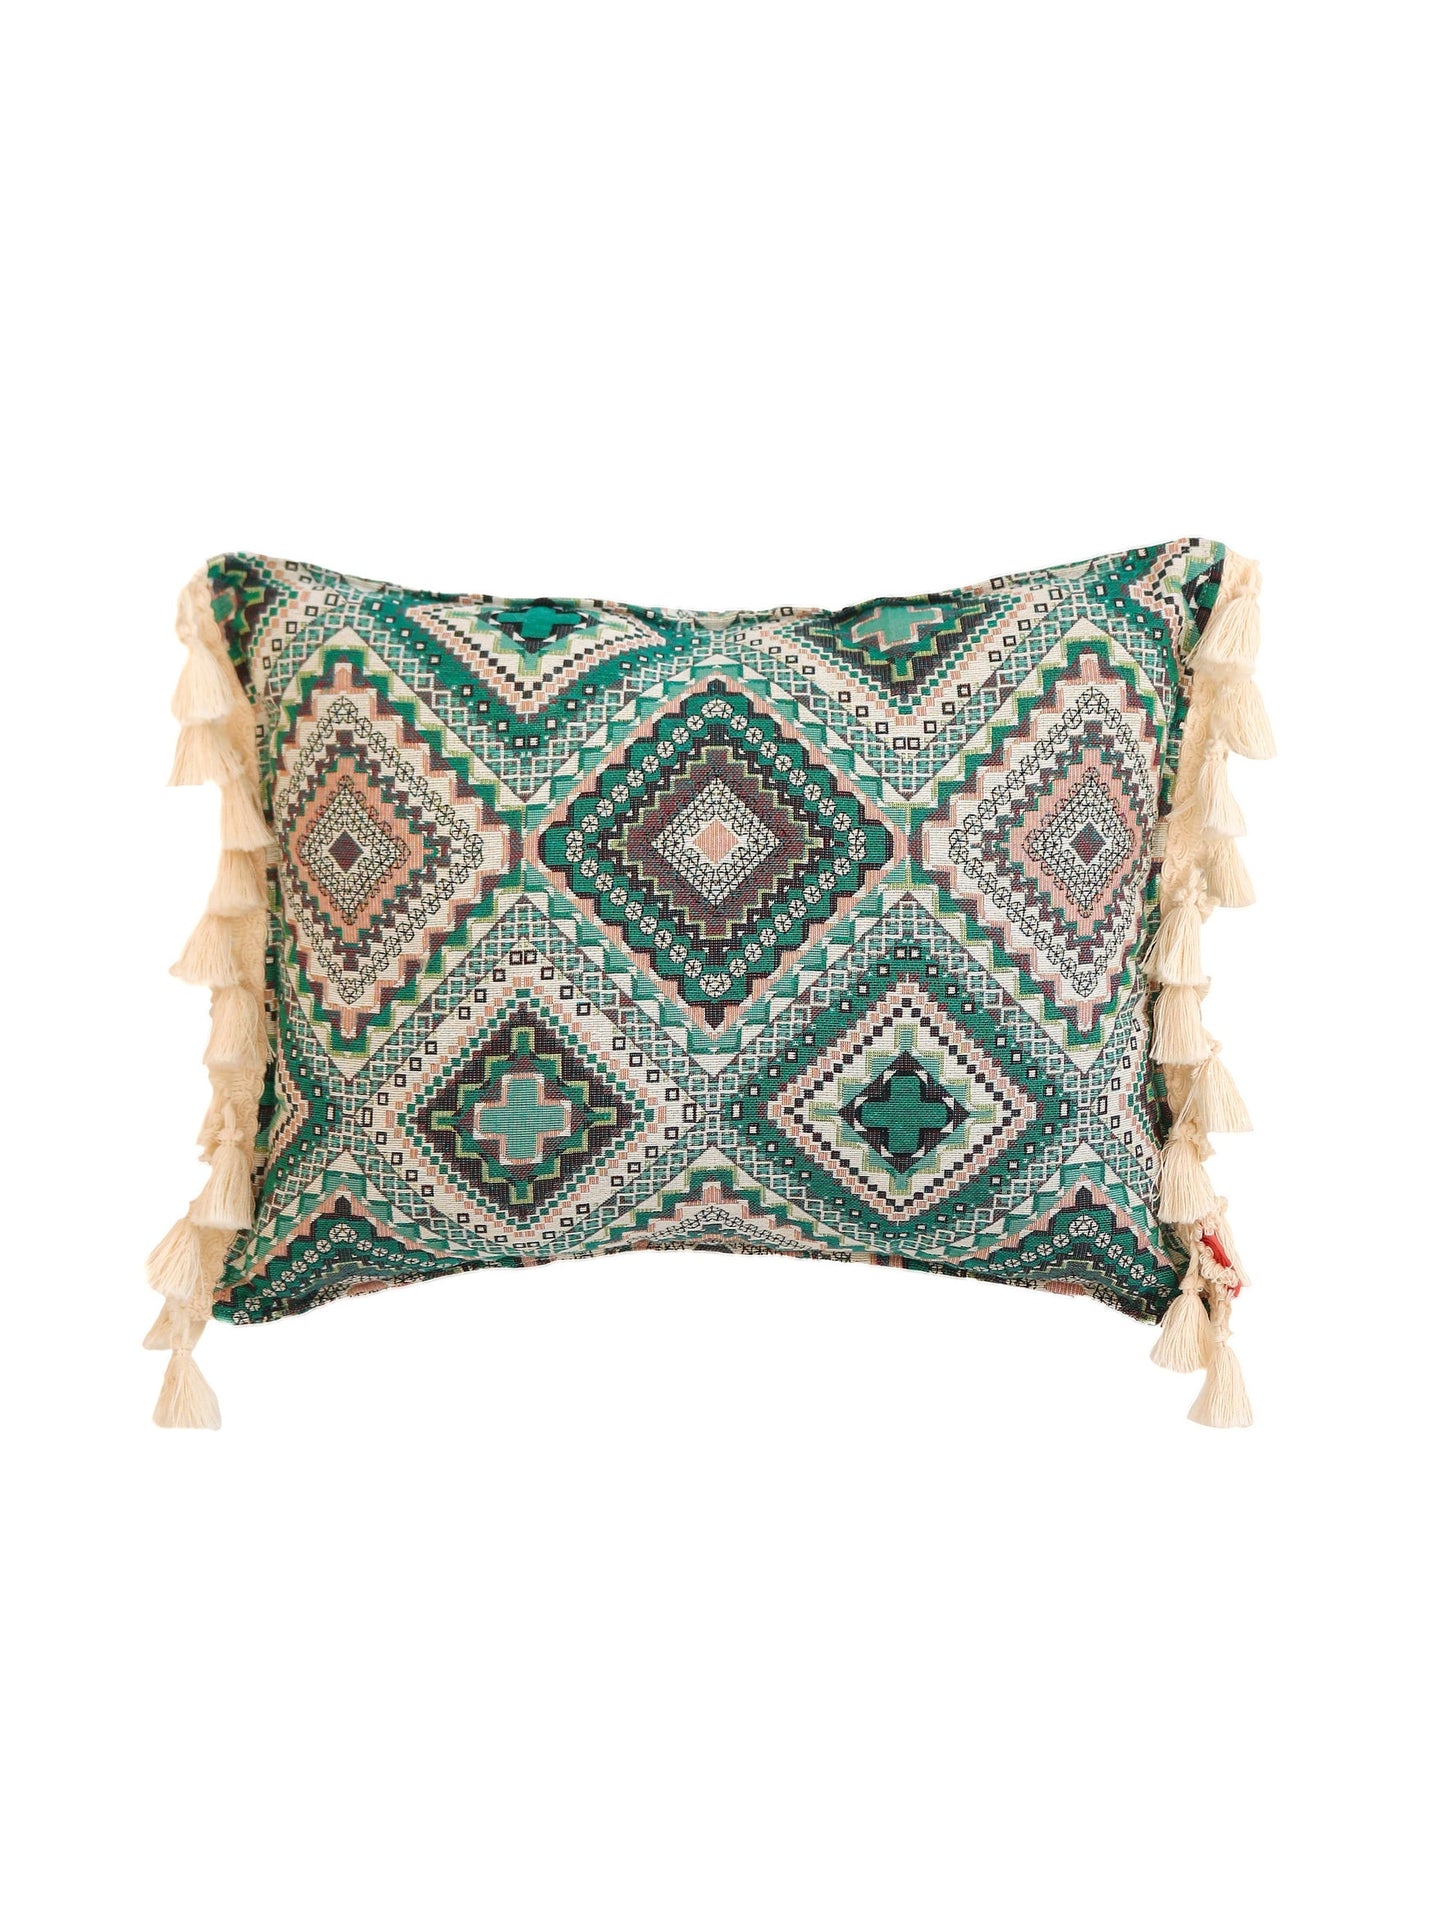 "Sea Green Mosaic" Pillow with Fringe